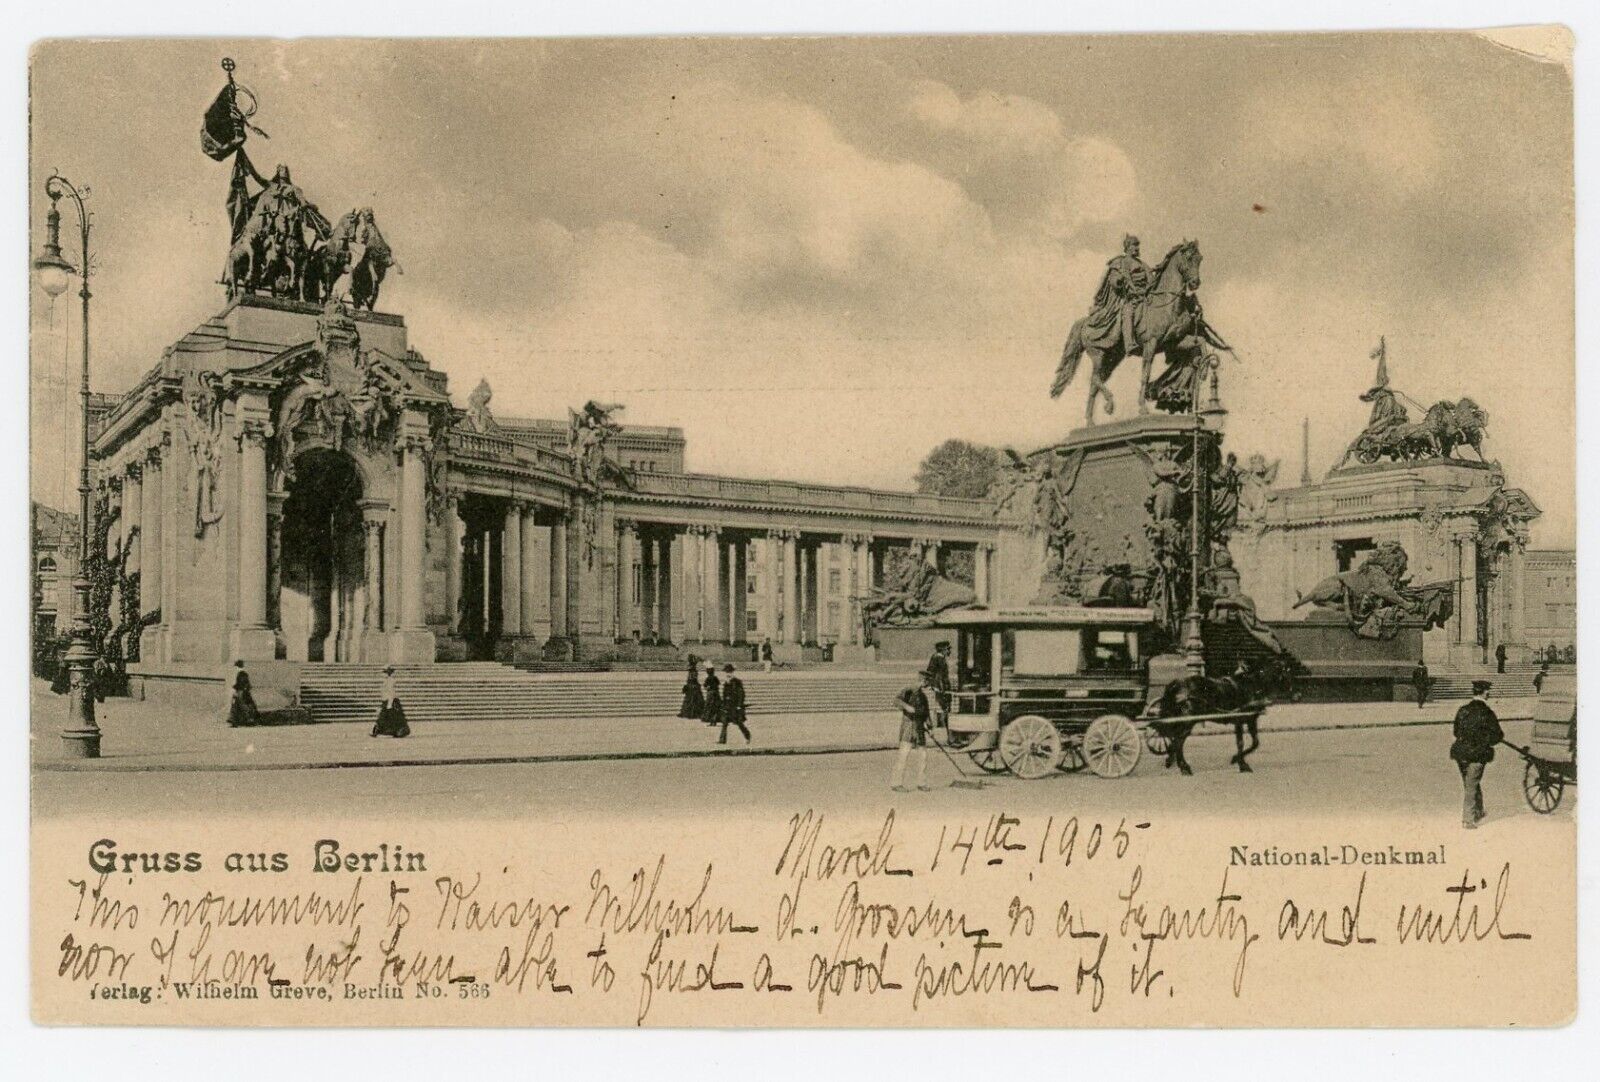 Gruss Aus Berlin Postcard From March 1905 National Monument, Mailed to Iowa